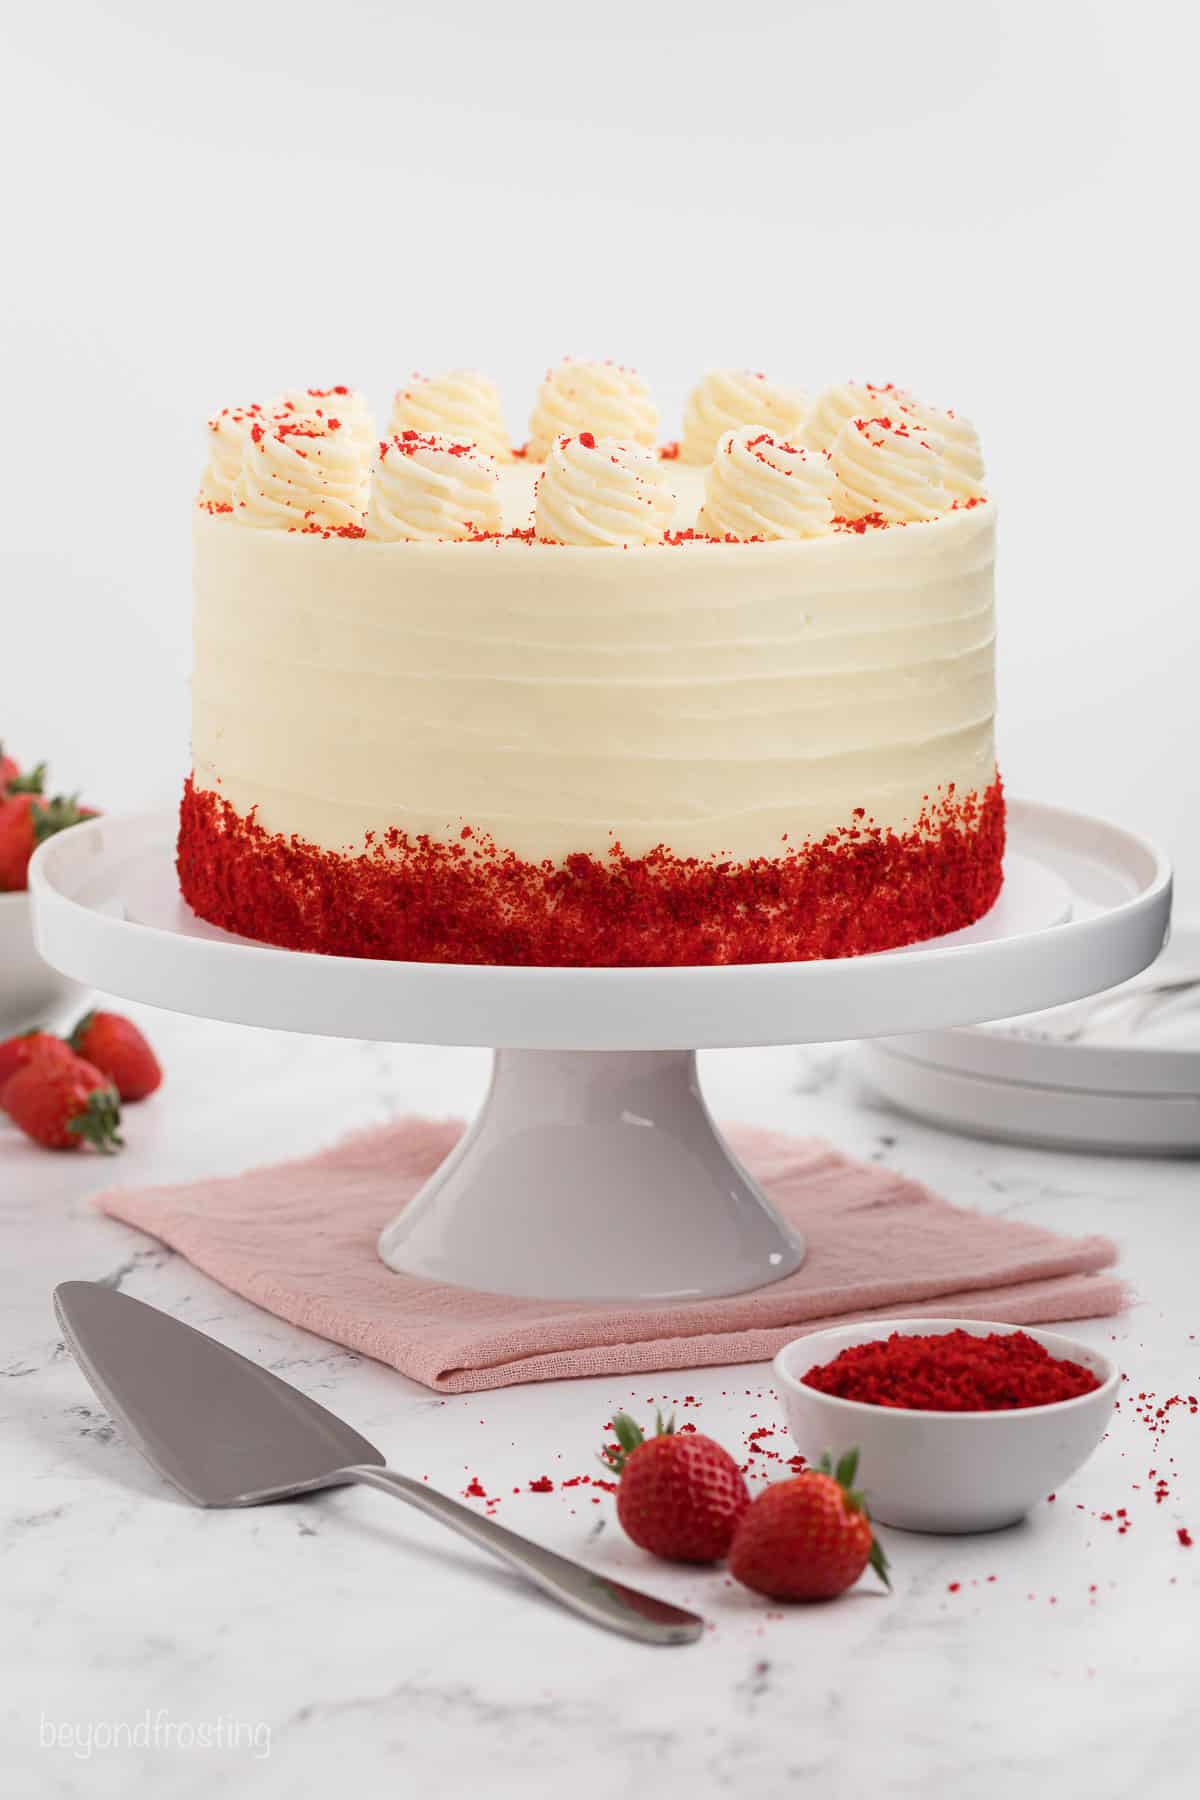 Frosted and decorated red velvet layer cake on a cake stand.